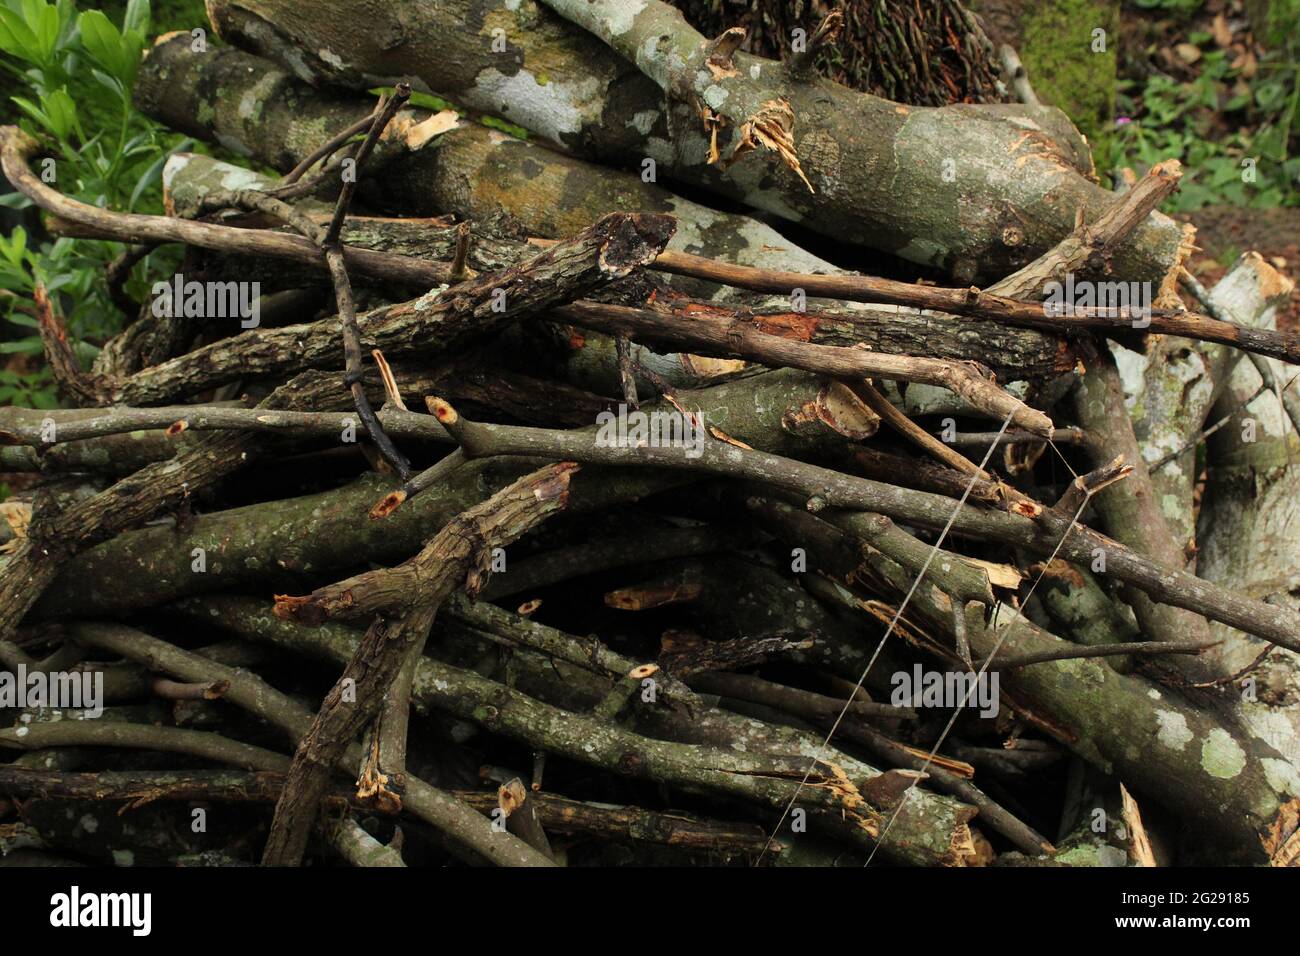 Pile of Wood and Twigs after Cutting down Tree. Wood for making Campfires. Wood as Fuel Stock Photo